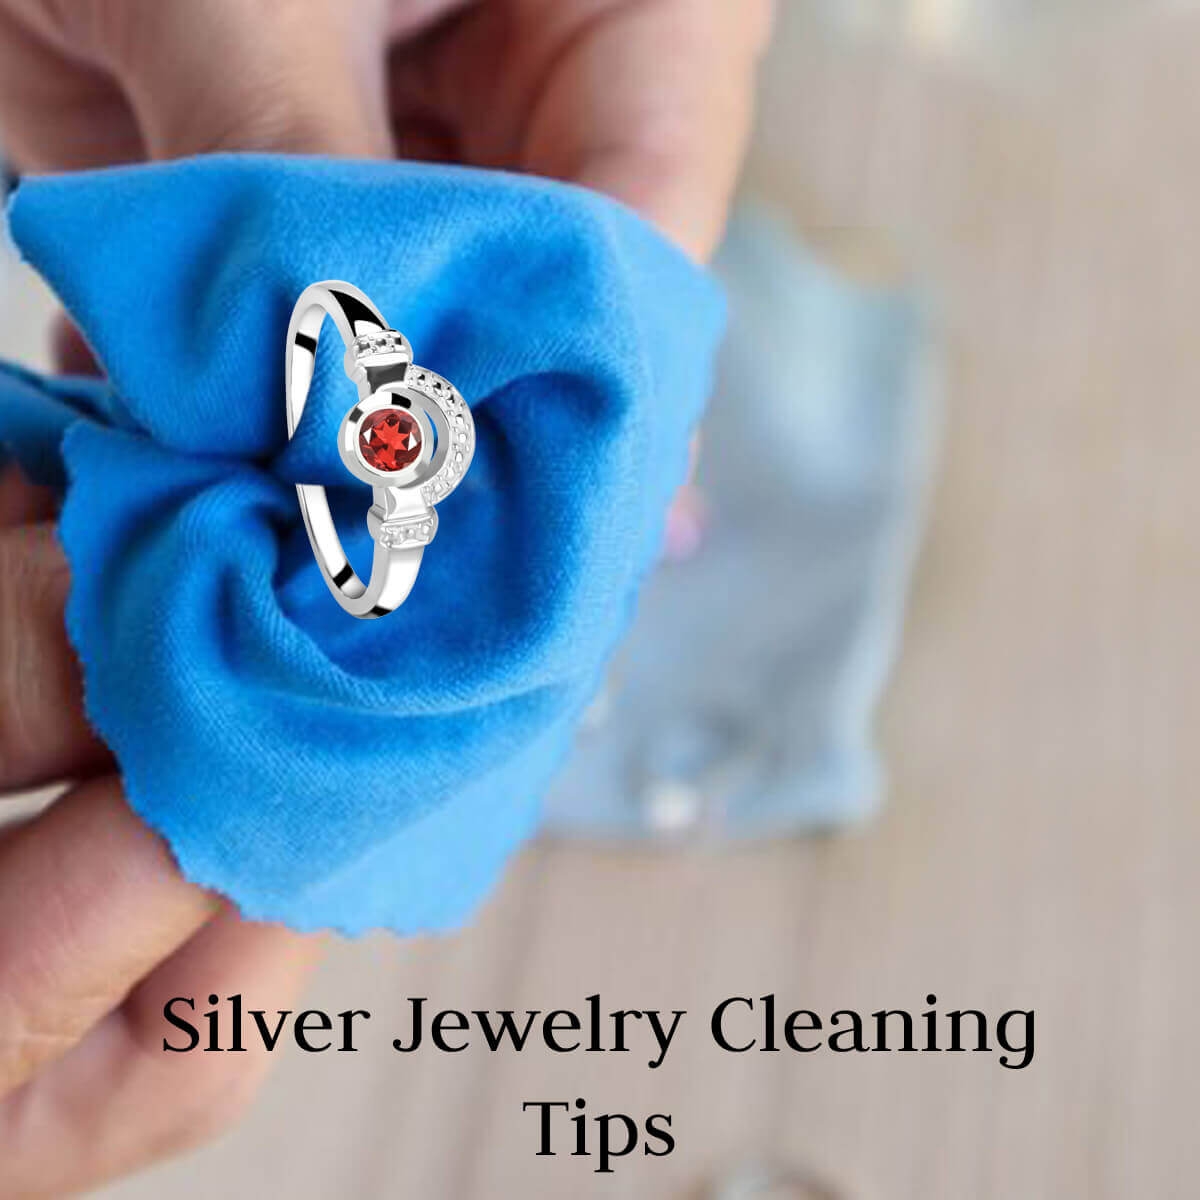 How to Clean Sterling Silver Jewelry at Home